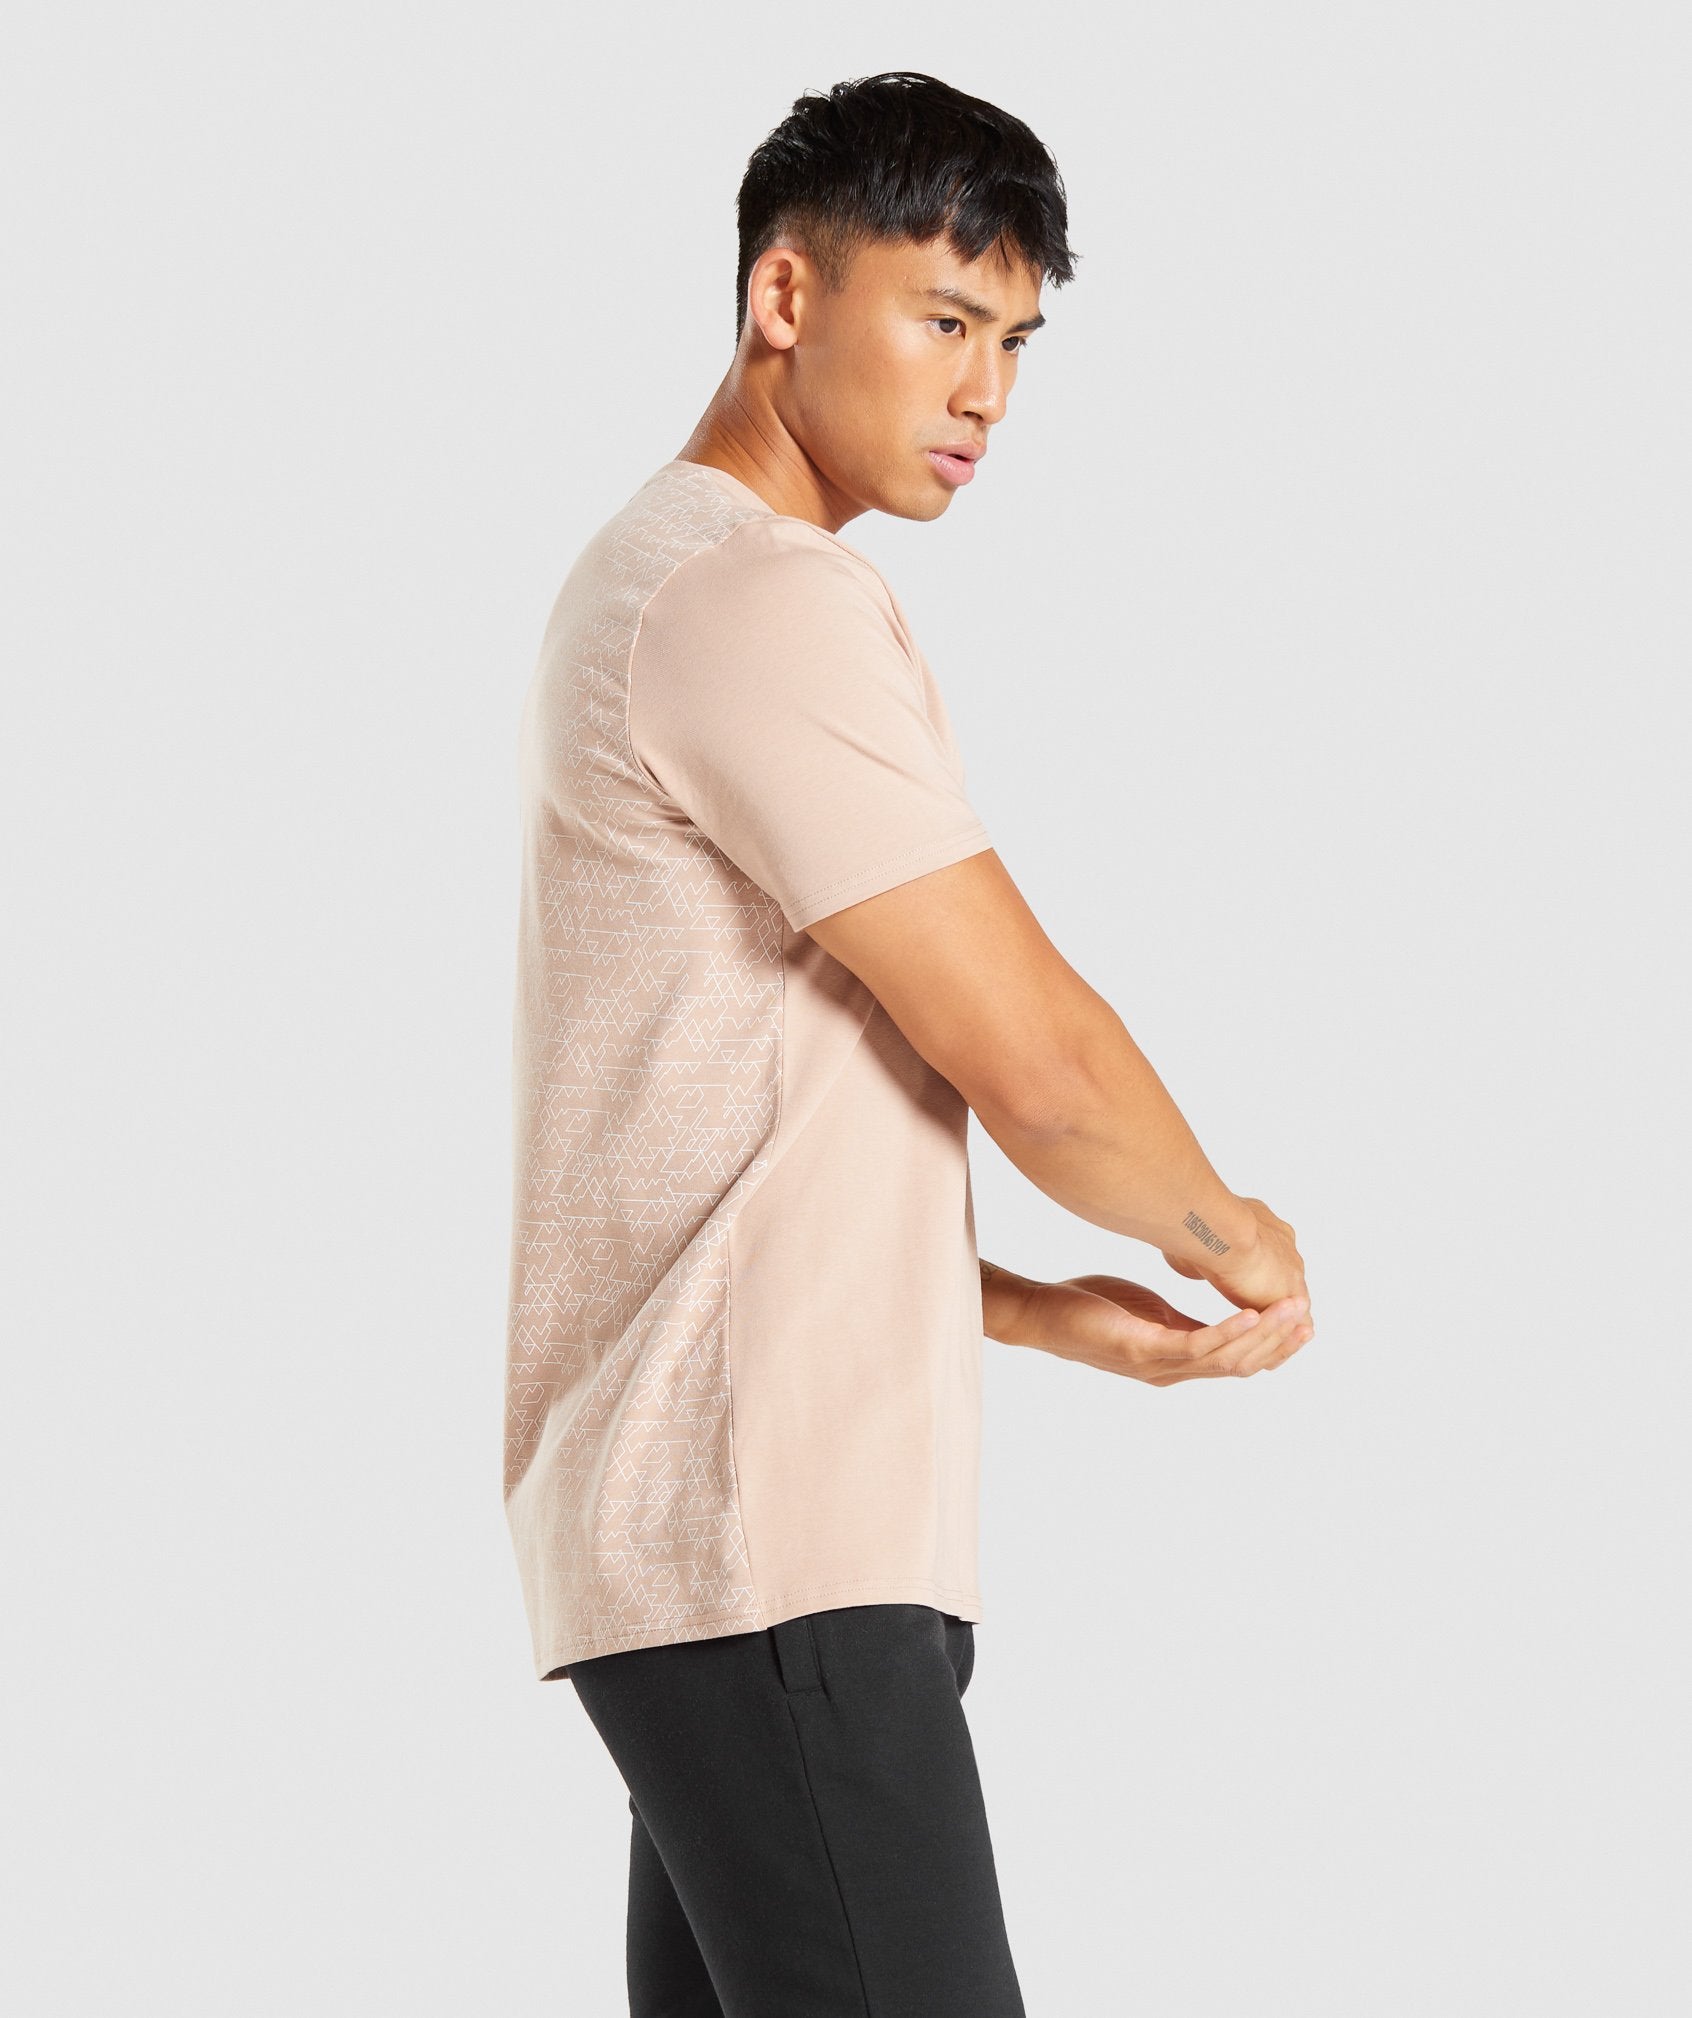 Linear Hex T-Shirt in Taupe - view 4